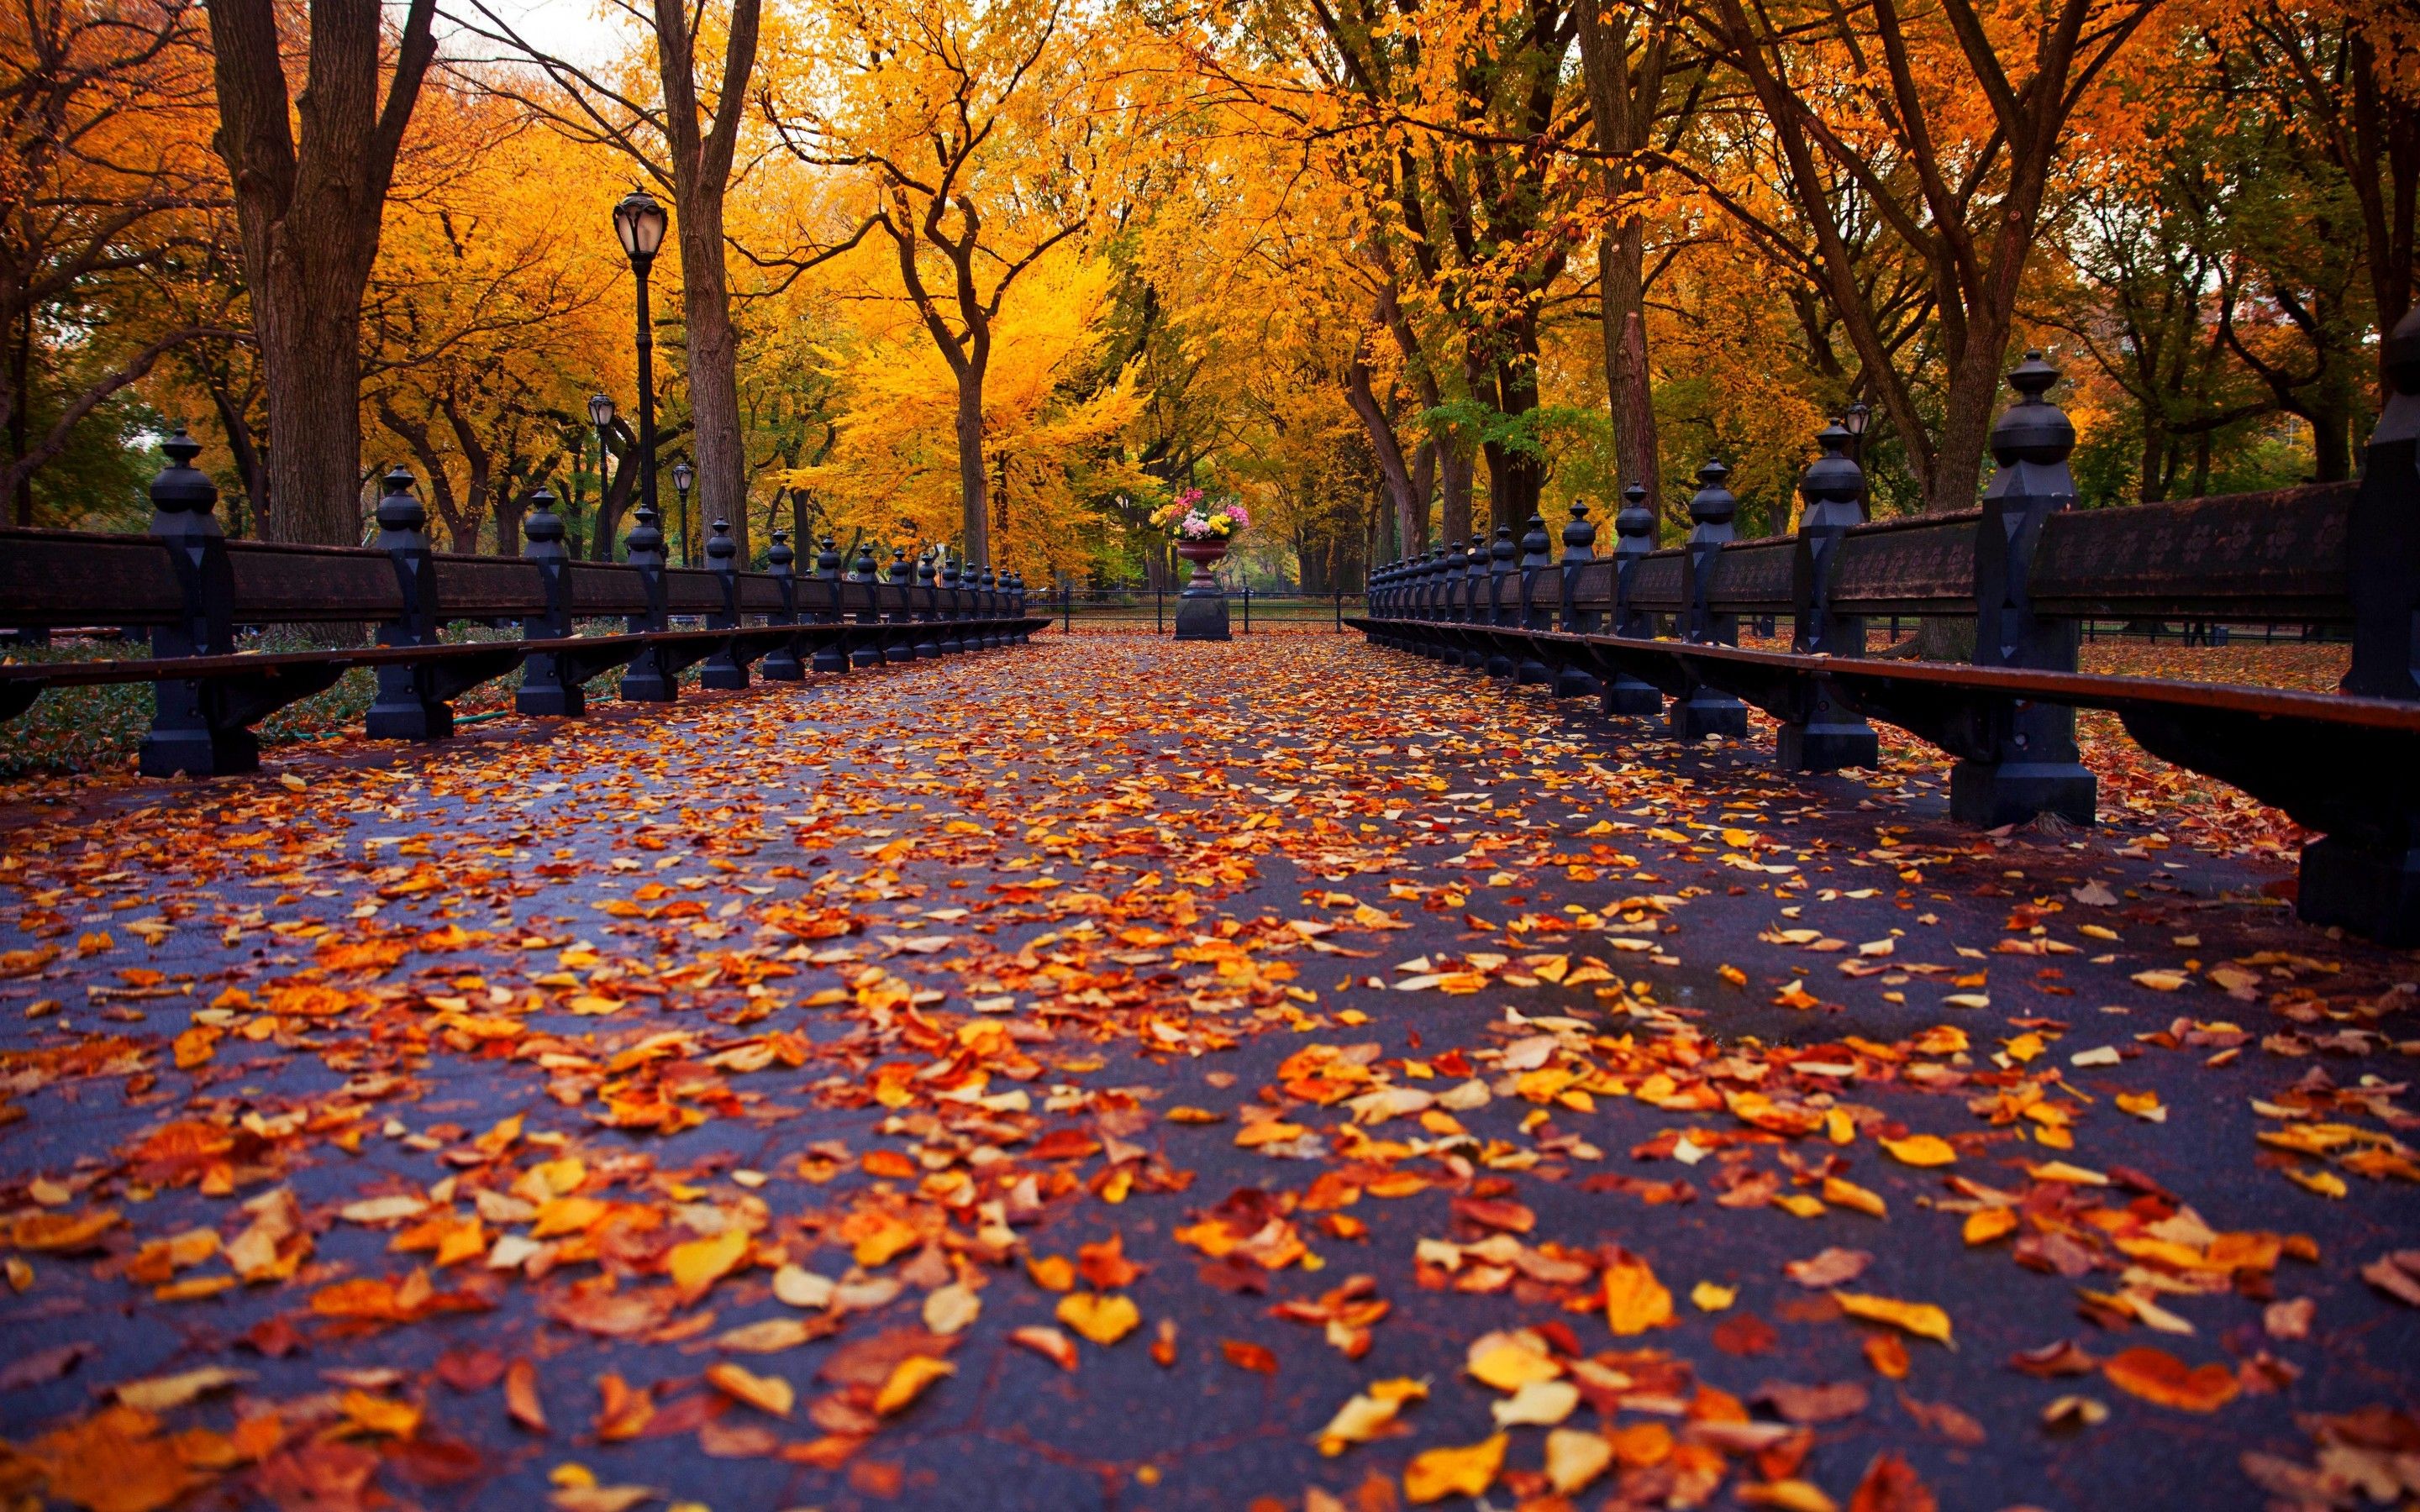 Autumn Central Park New York Wallpapers Wallpaper Cave